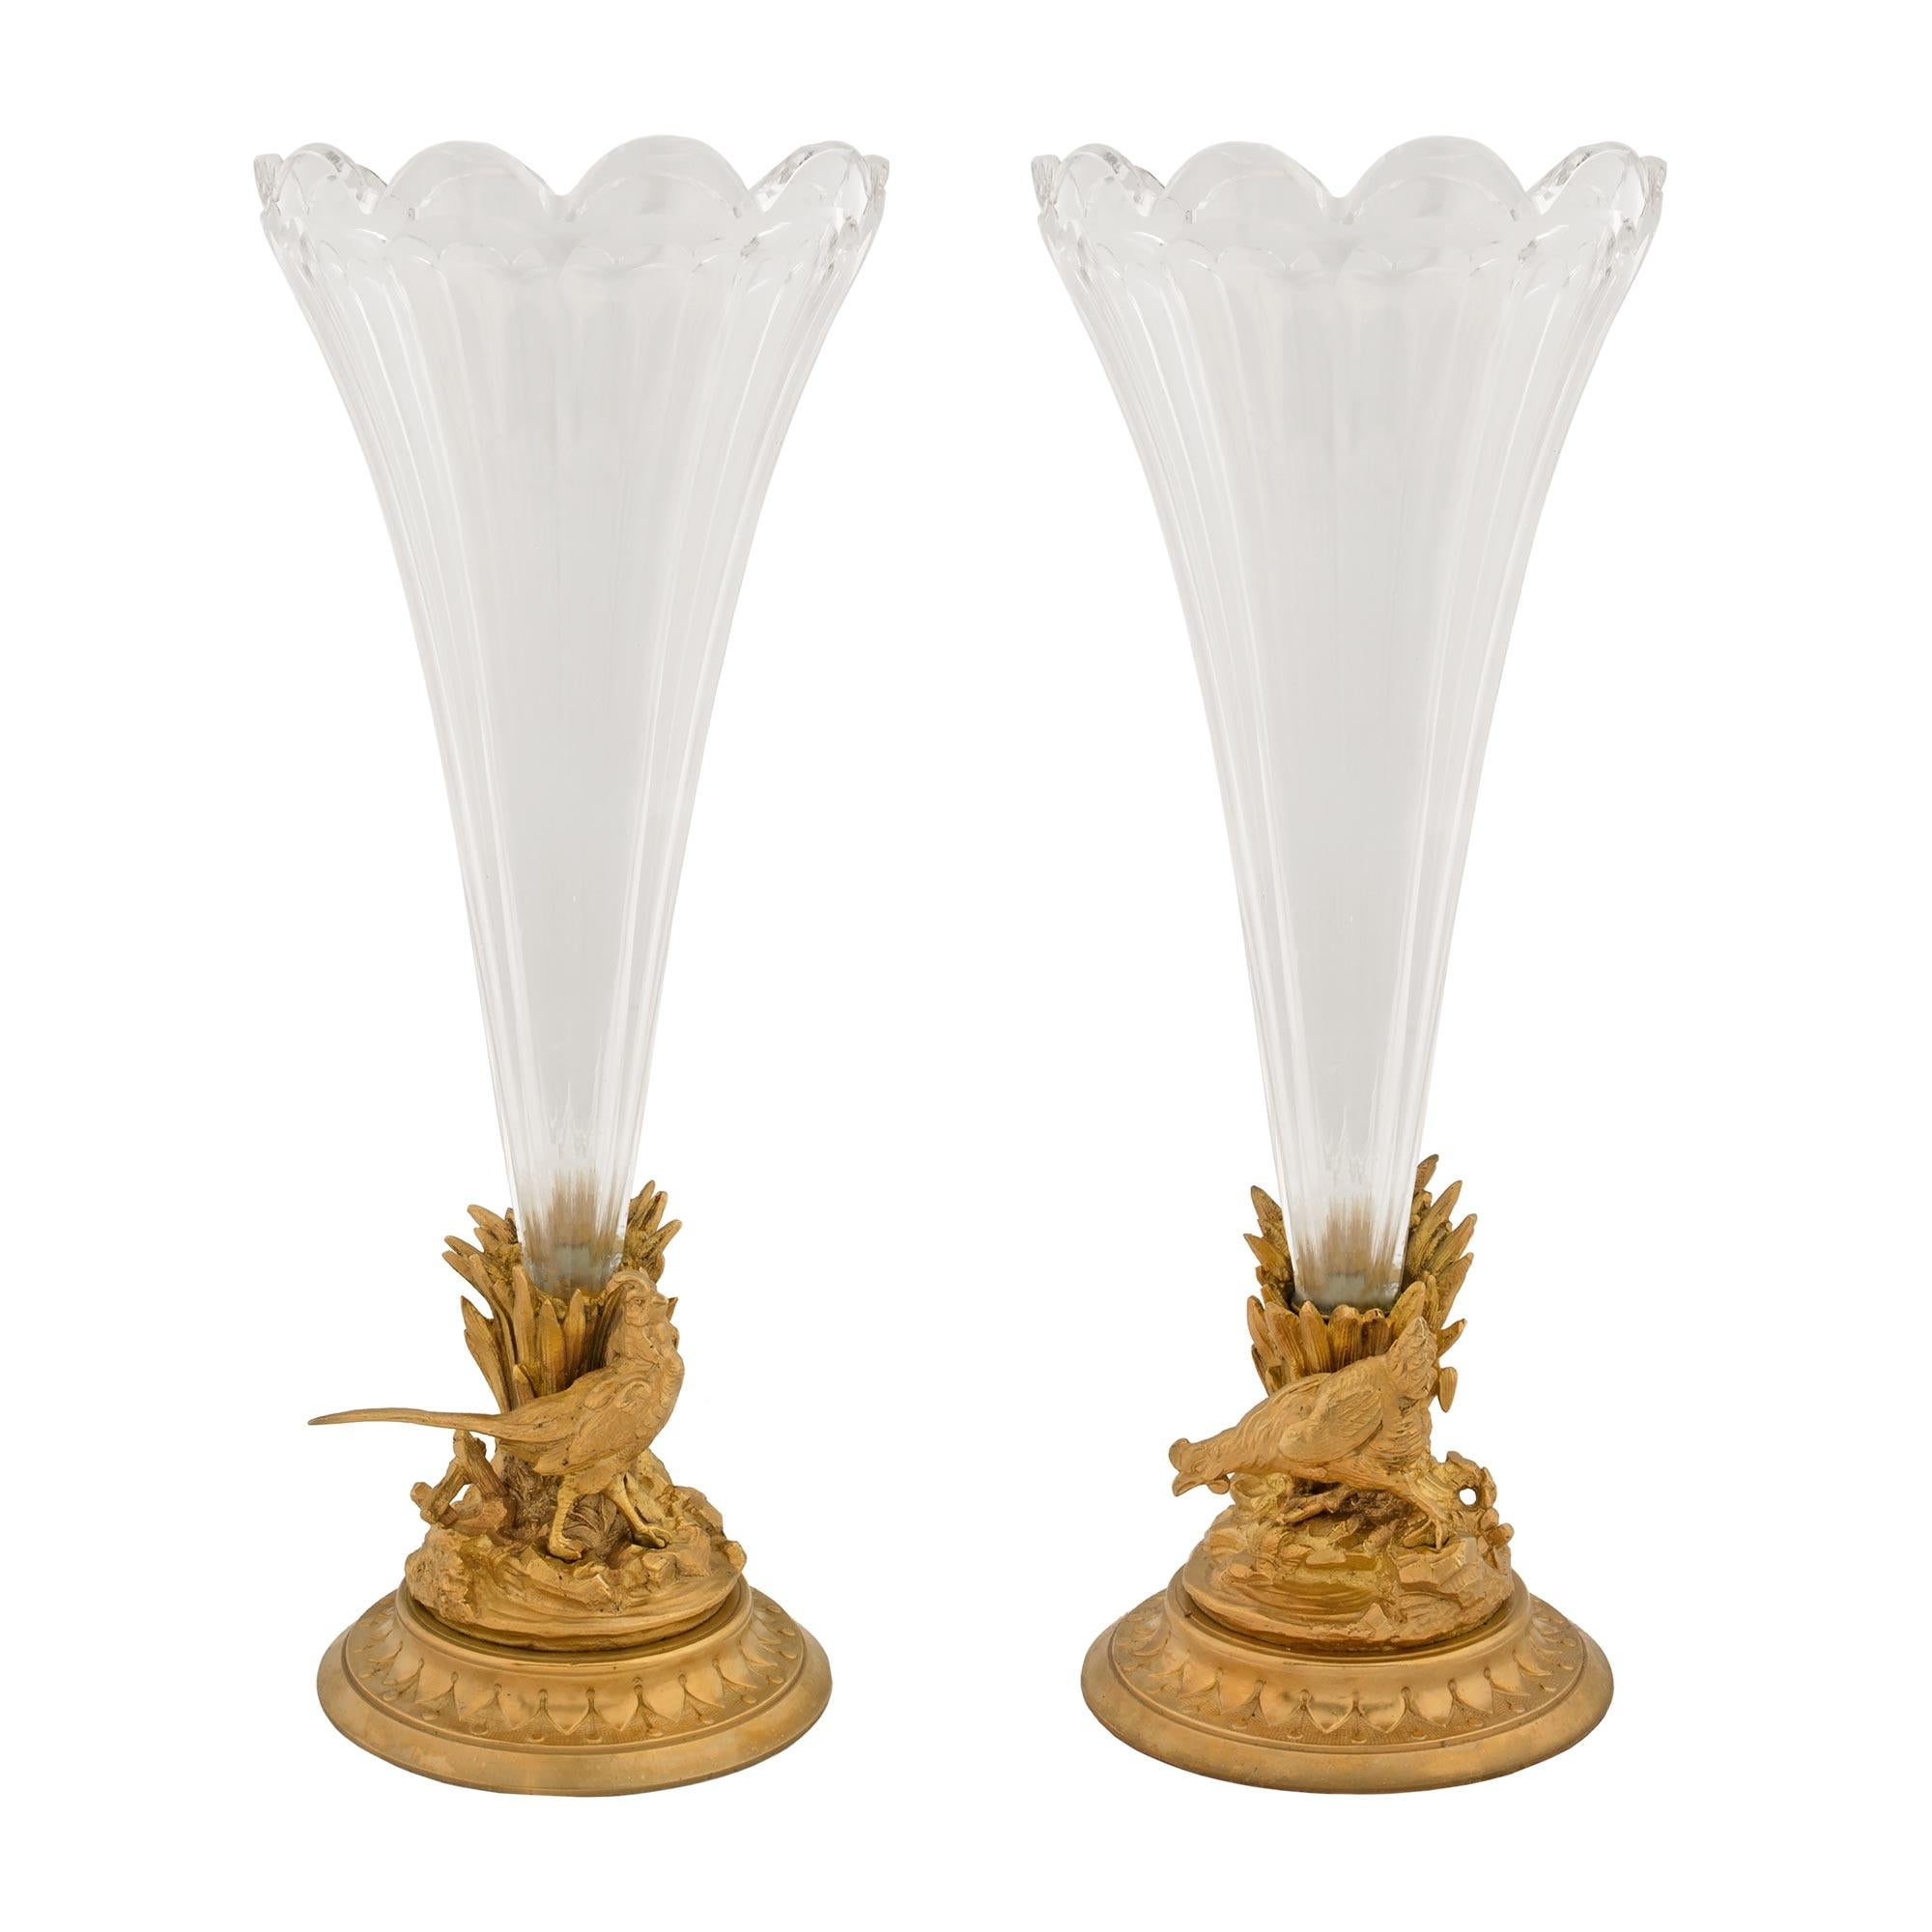 A striking true pair of French 19th century Louis XVI st. Baccarat crystal and ormolu vases. Each vase is raised by a mottled circular base with a decorative wrap around pattern. Each vase displays an impressive and richly detailed rock like design